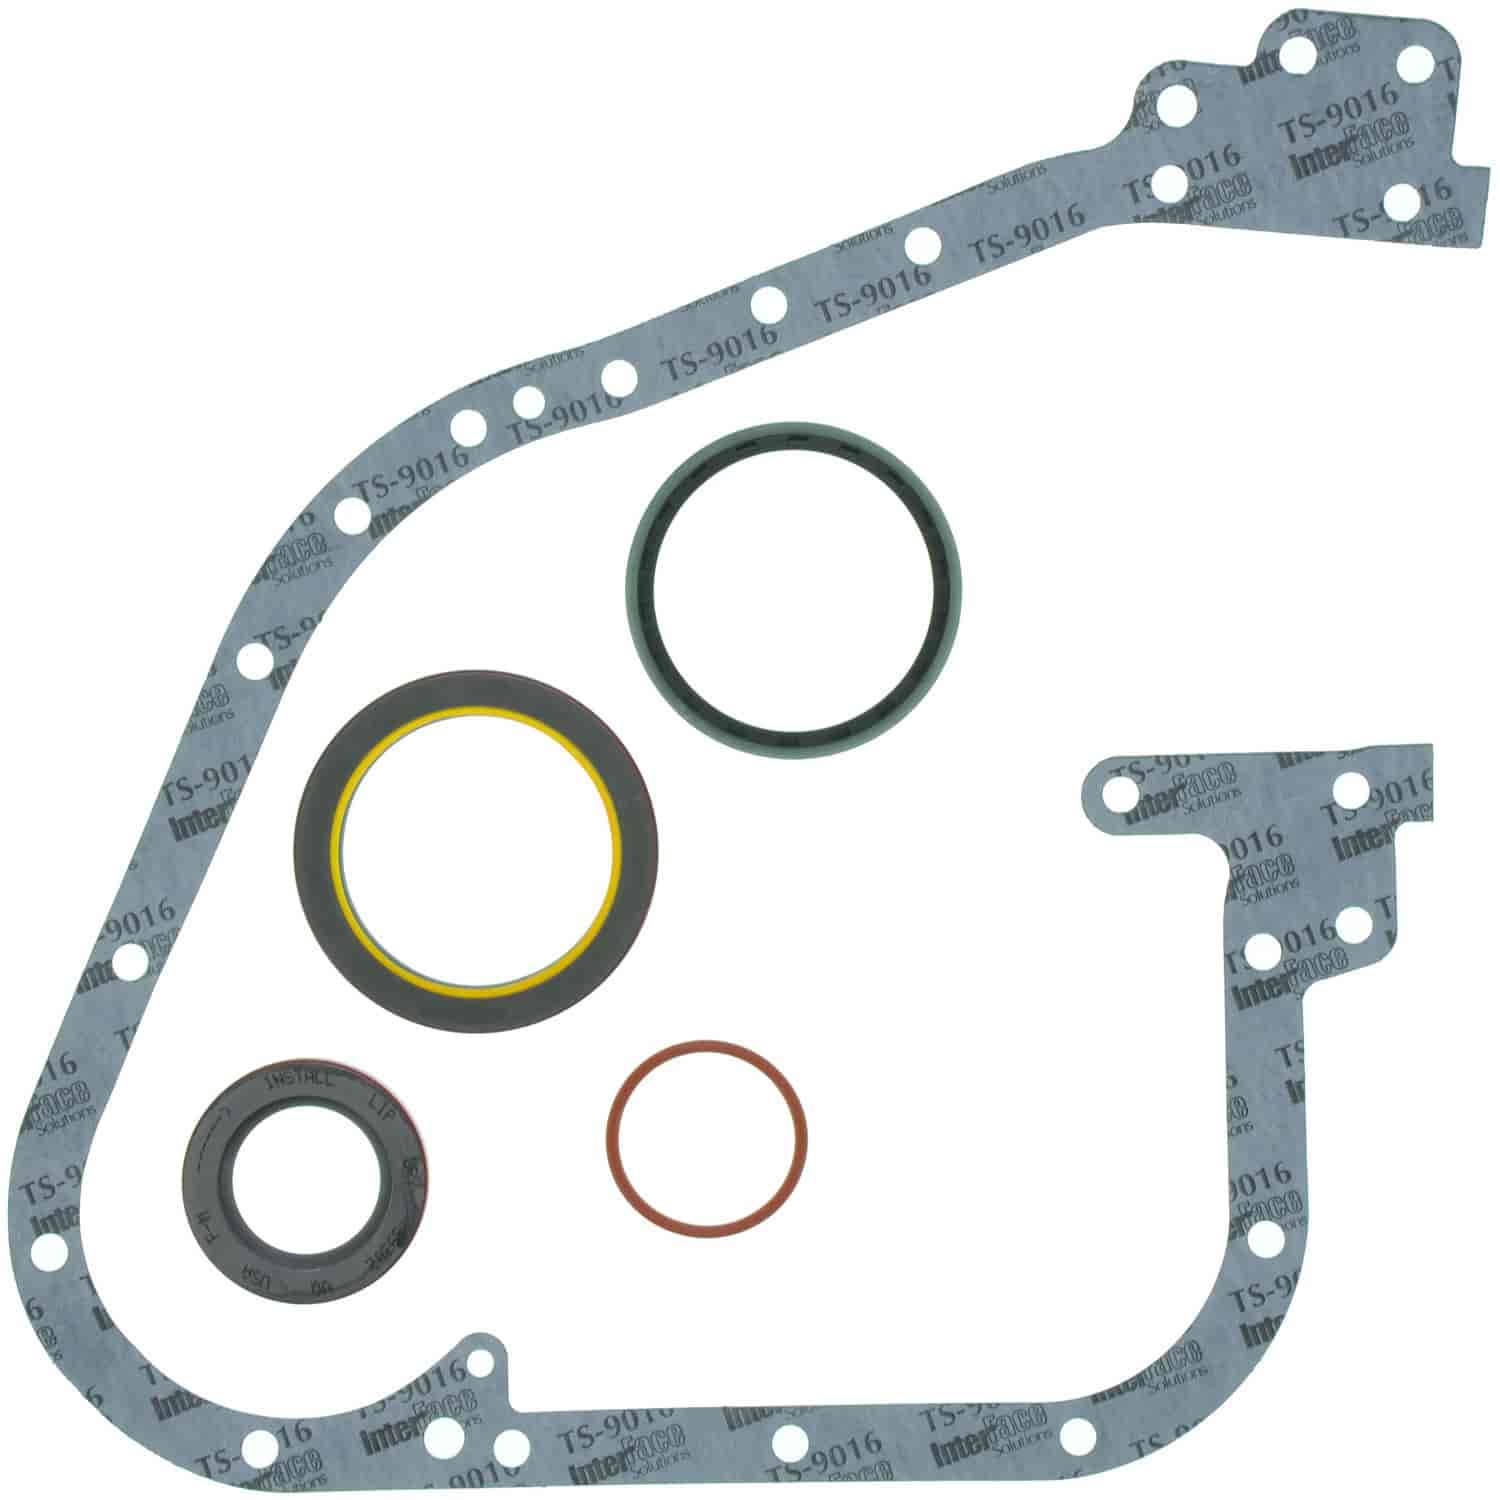 Timing Cover Set for Cummins NH/NT V Series Engines